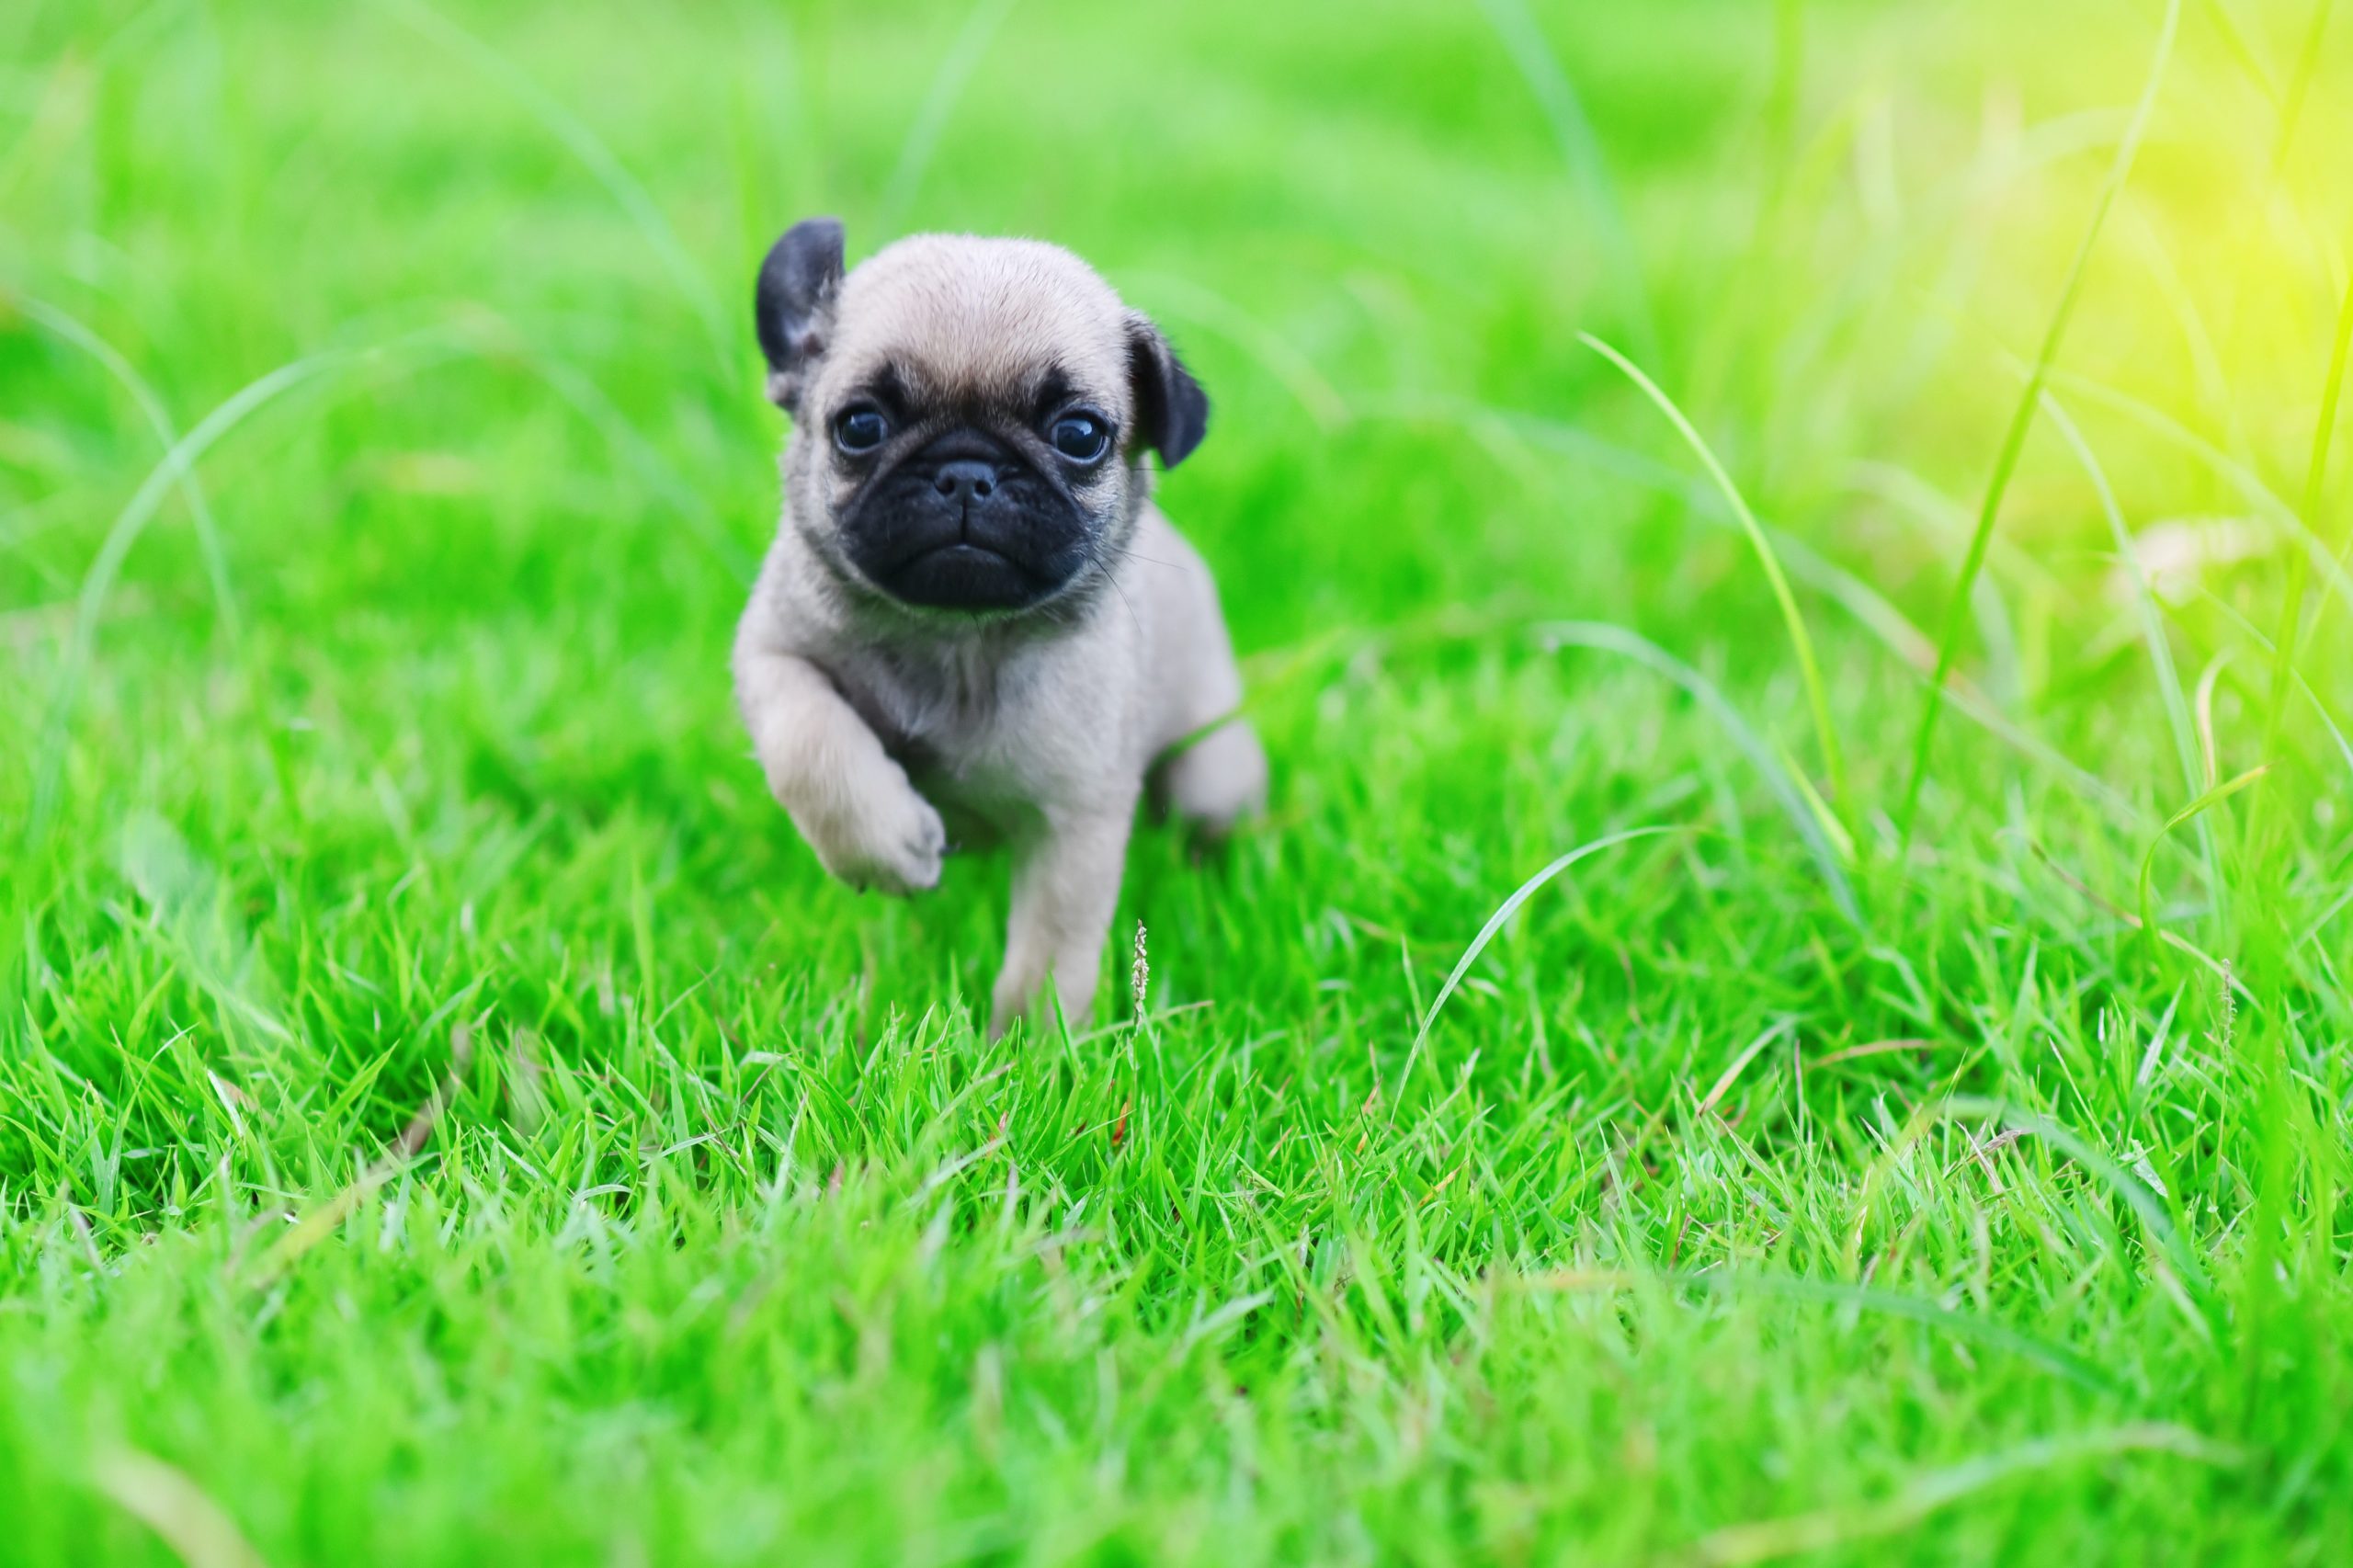 30 Cute Pug Pictures That Will Make You Want One | Reader’s Digest